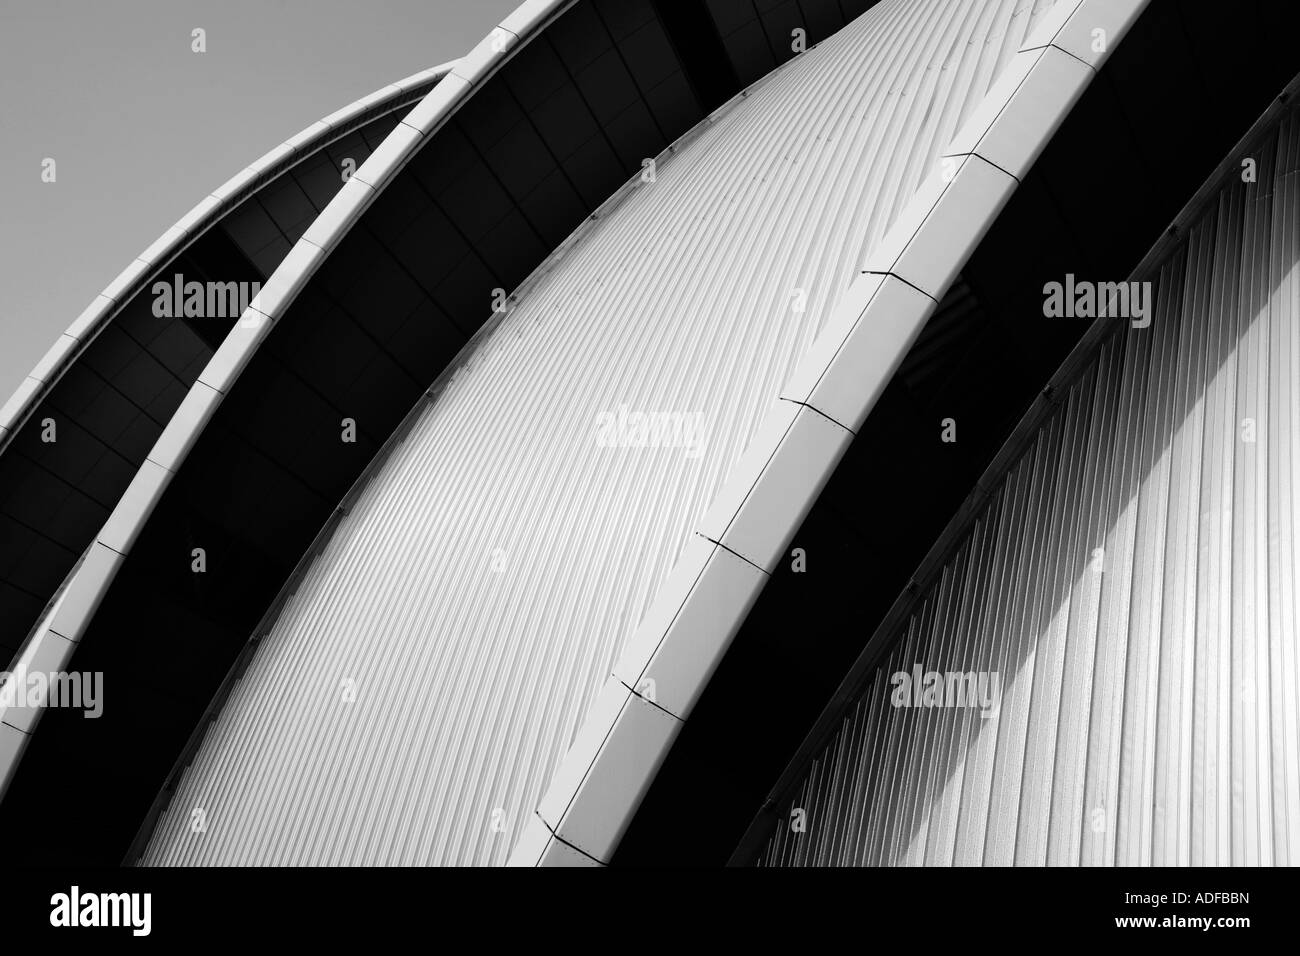 Abstract archiectural image of Glasgows SECC Stock Photo